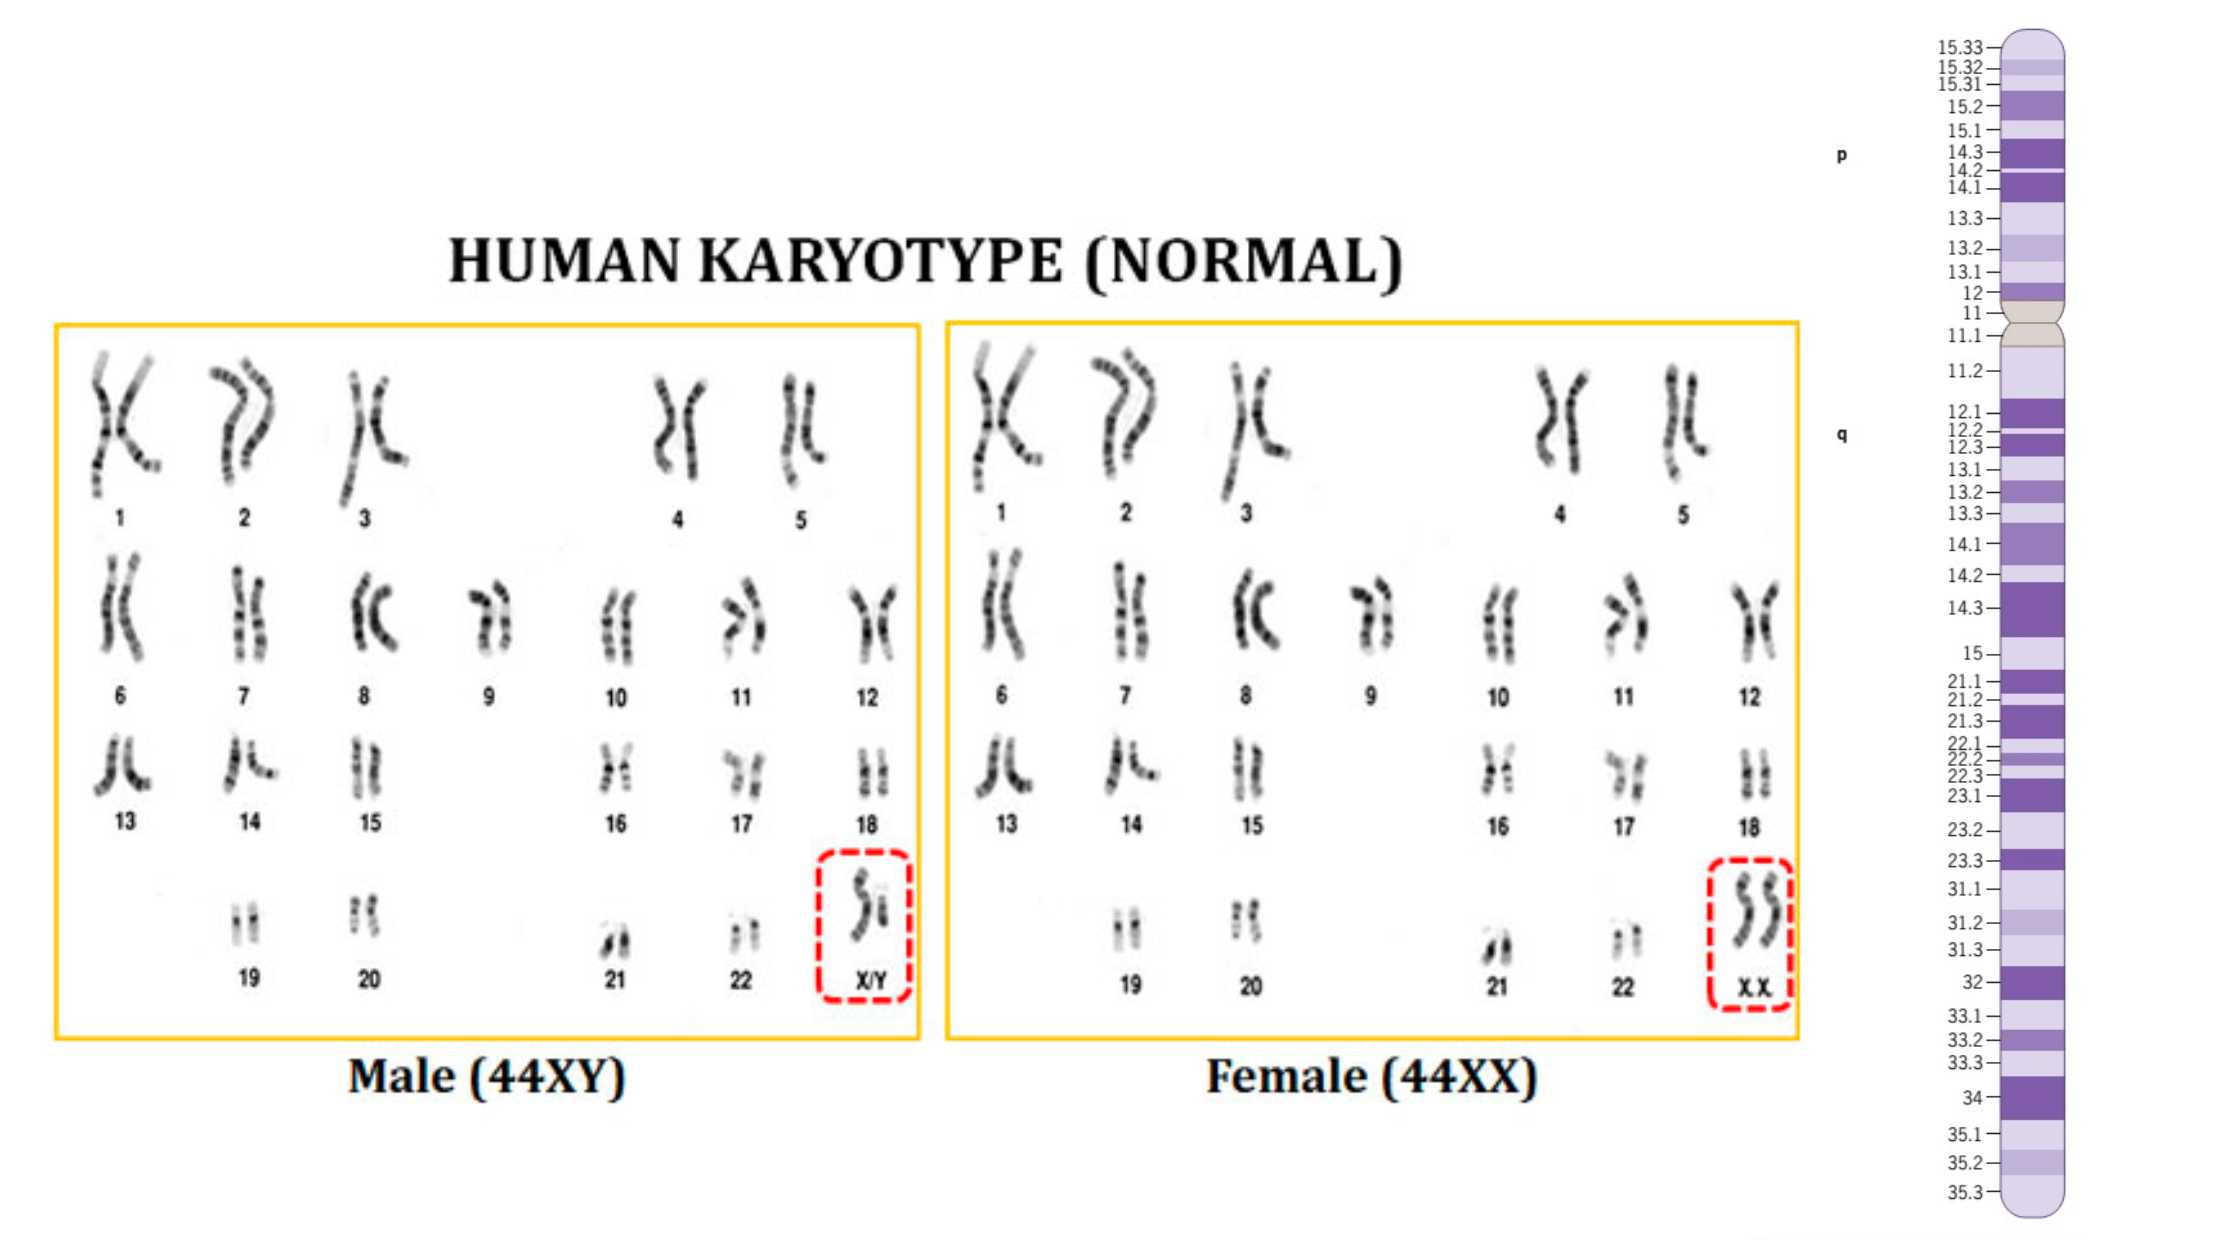 Karyotype and Idiogram - Definition, Procedure, Steps, Applications